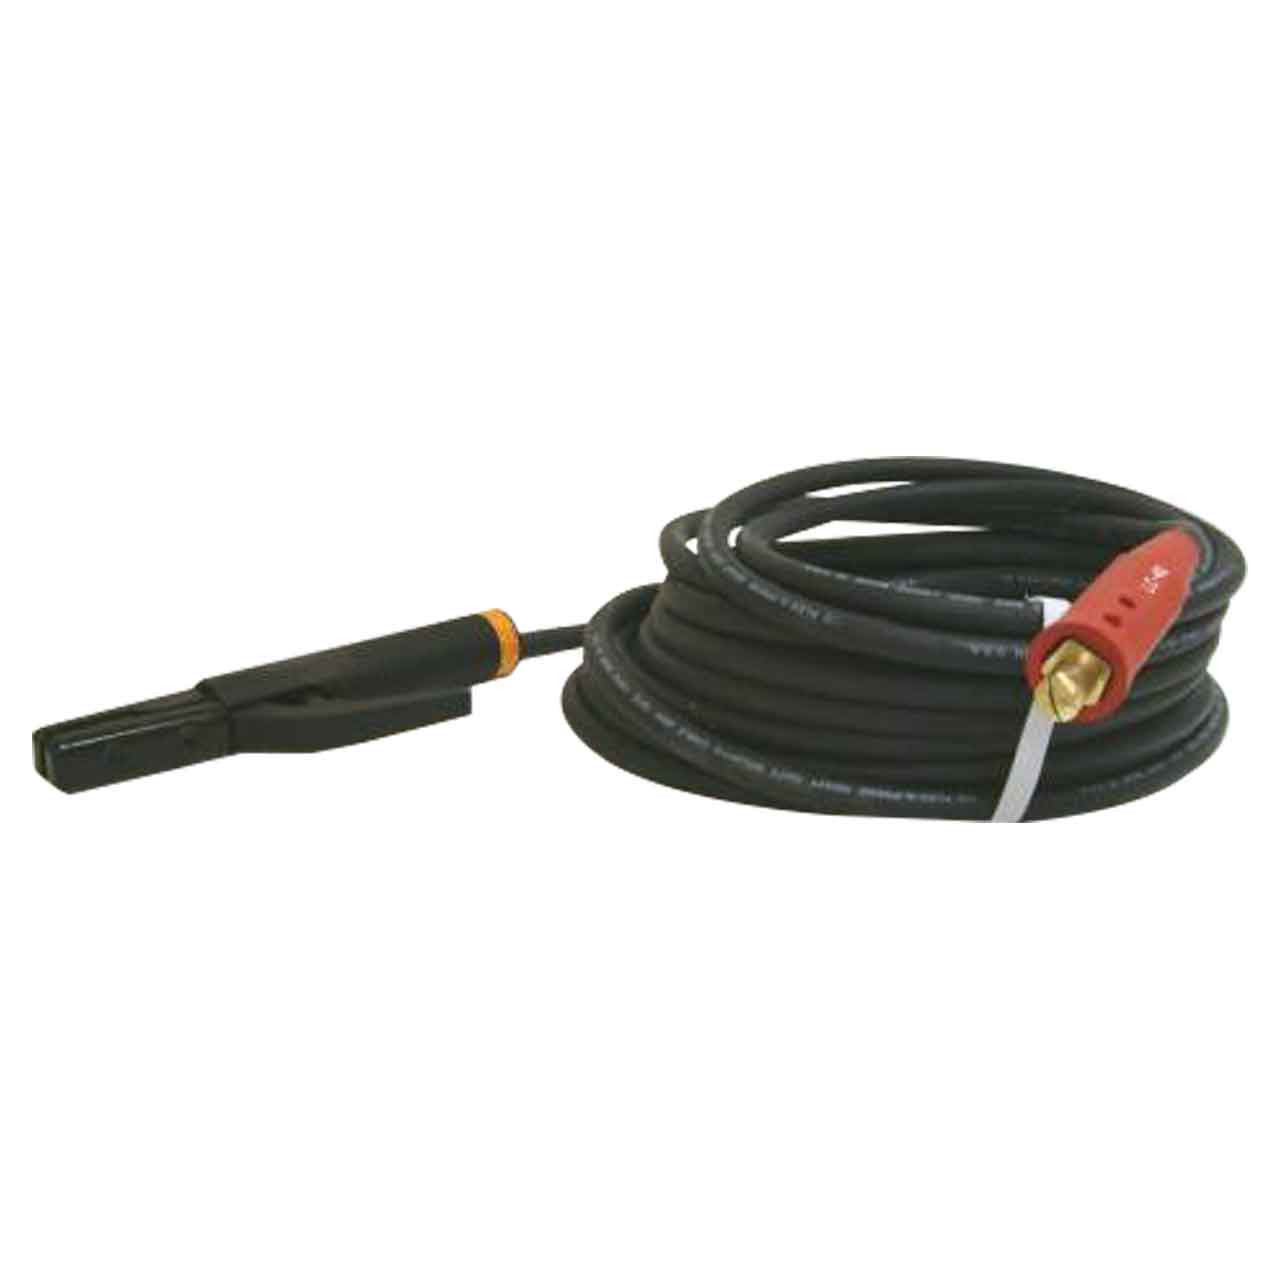 https://cdn11.bigcommerce.com/s-u3hf7jh4/images/stencil/1280x1280/products/736129/1107066/welding-cable-lead-50-foot-positive-lead-stinger__27115.1697049596.jpg?c=2